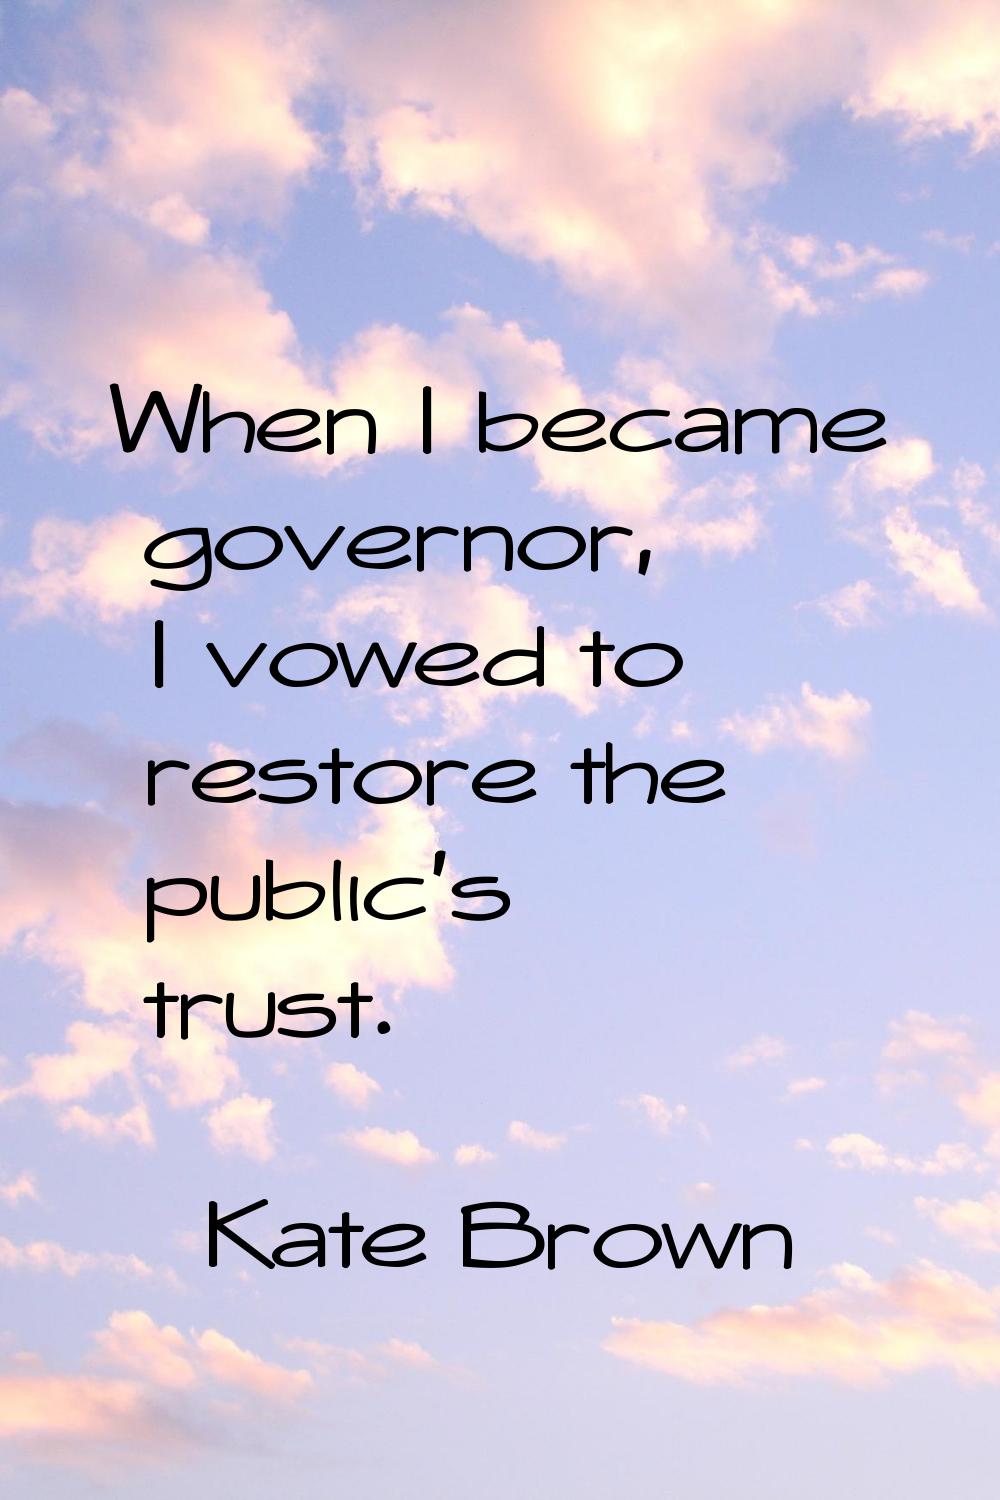 When I became governor, I vowed to restore the public's trust.